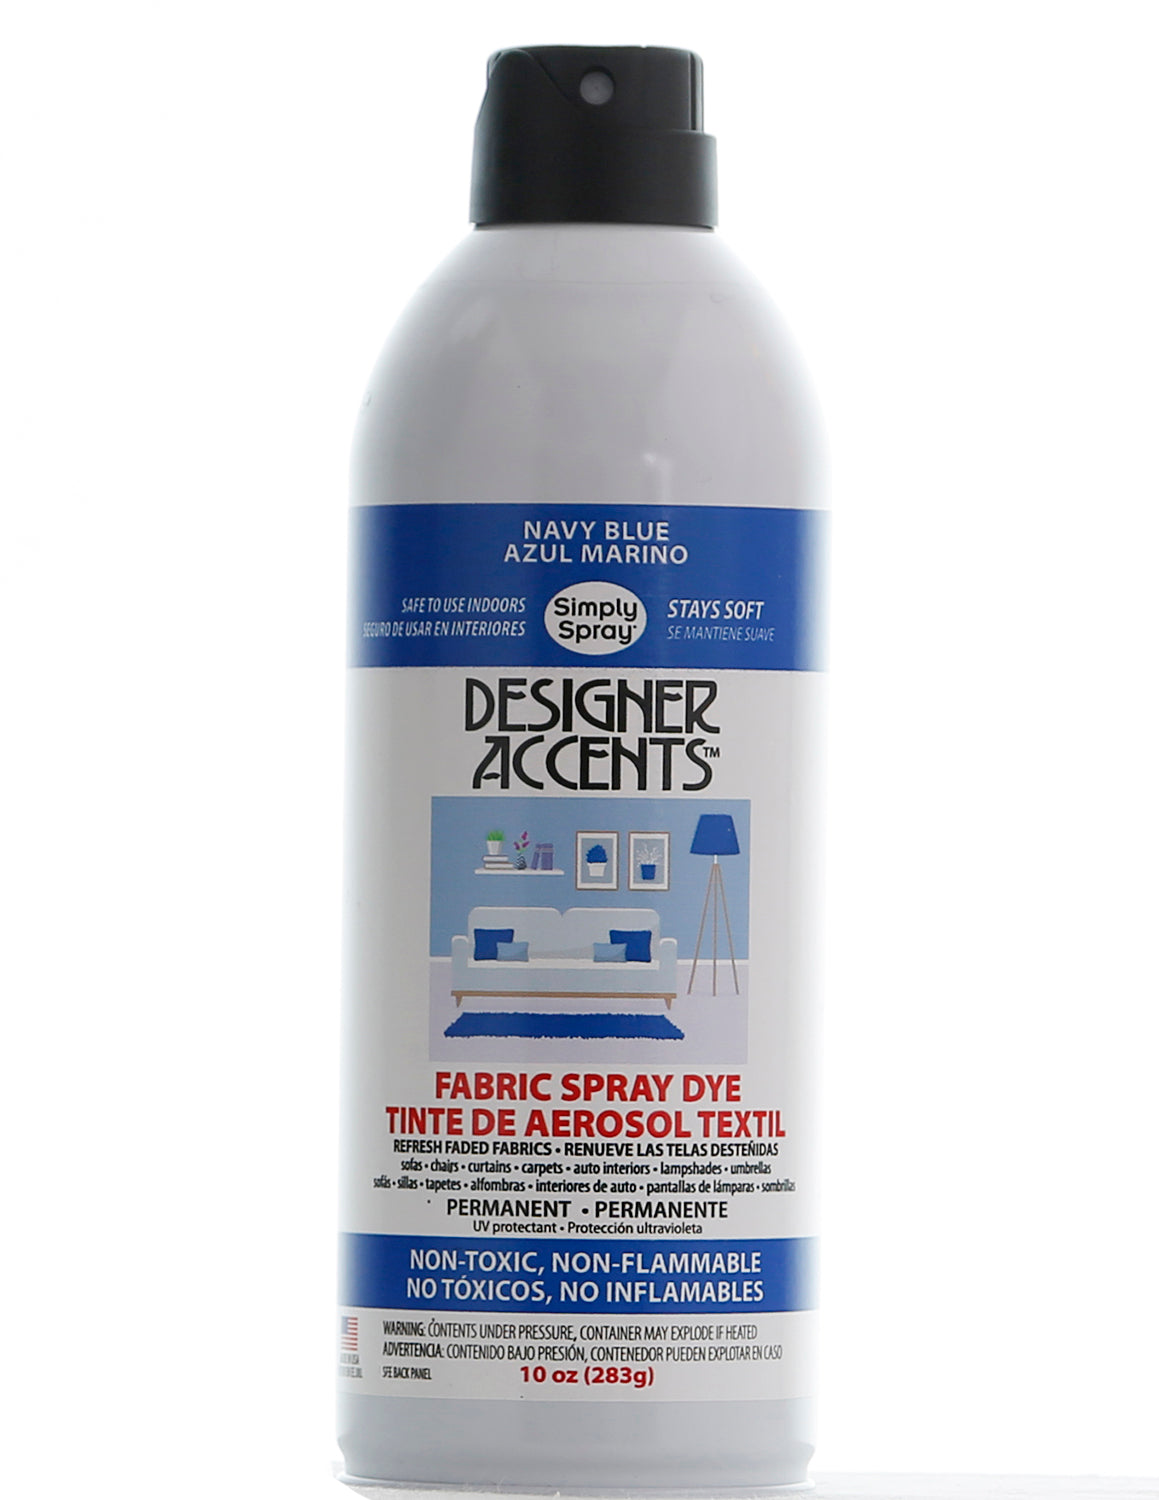 Designer Accents Fabric Paint Spray Dye by Simply Spray - Blue